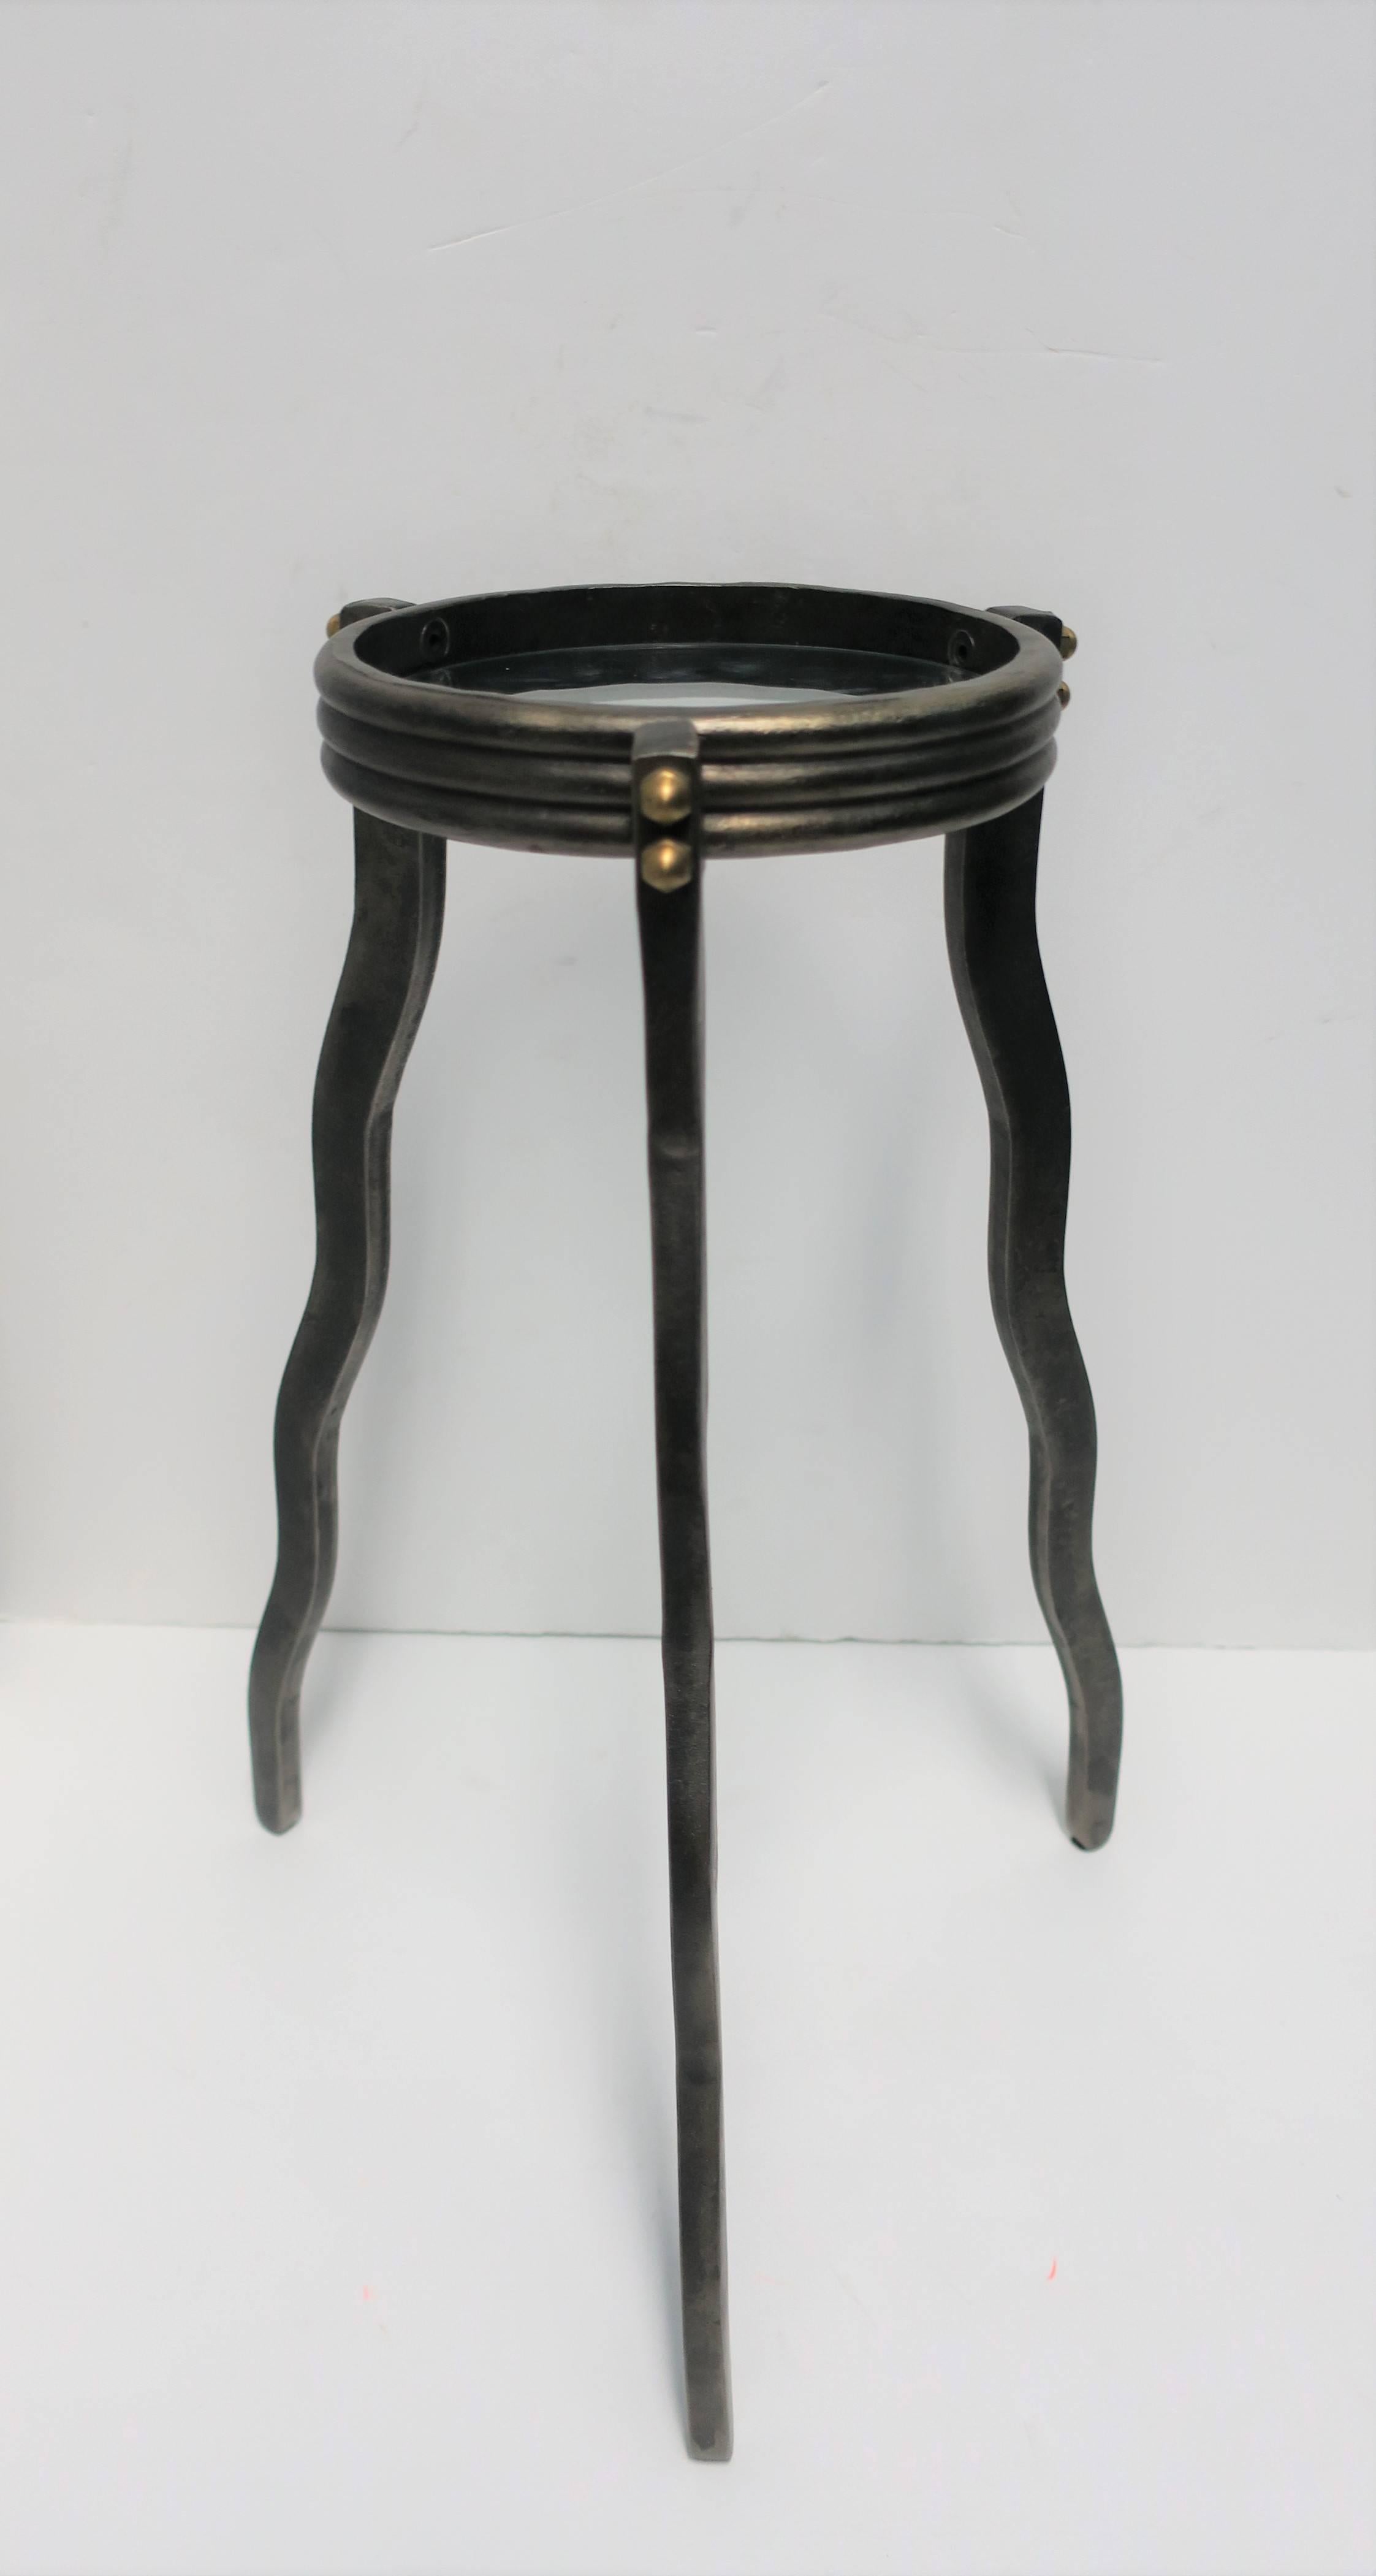 A substantial dark metal small tri pod side or drinks table with brass bolt detail, glass top, and 'wavy' legs in an Art Deco style.

Table measures: 7.50 in. diameter x 19.25 in. H

Table available here online. By request, table can be made